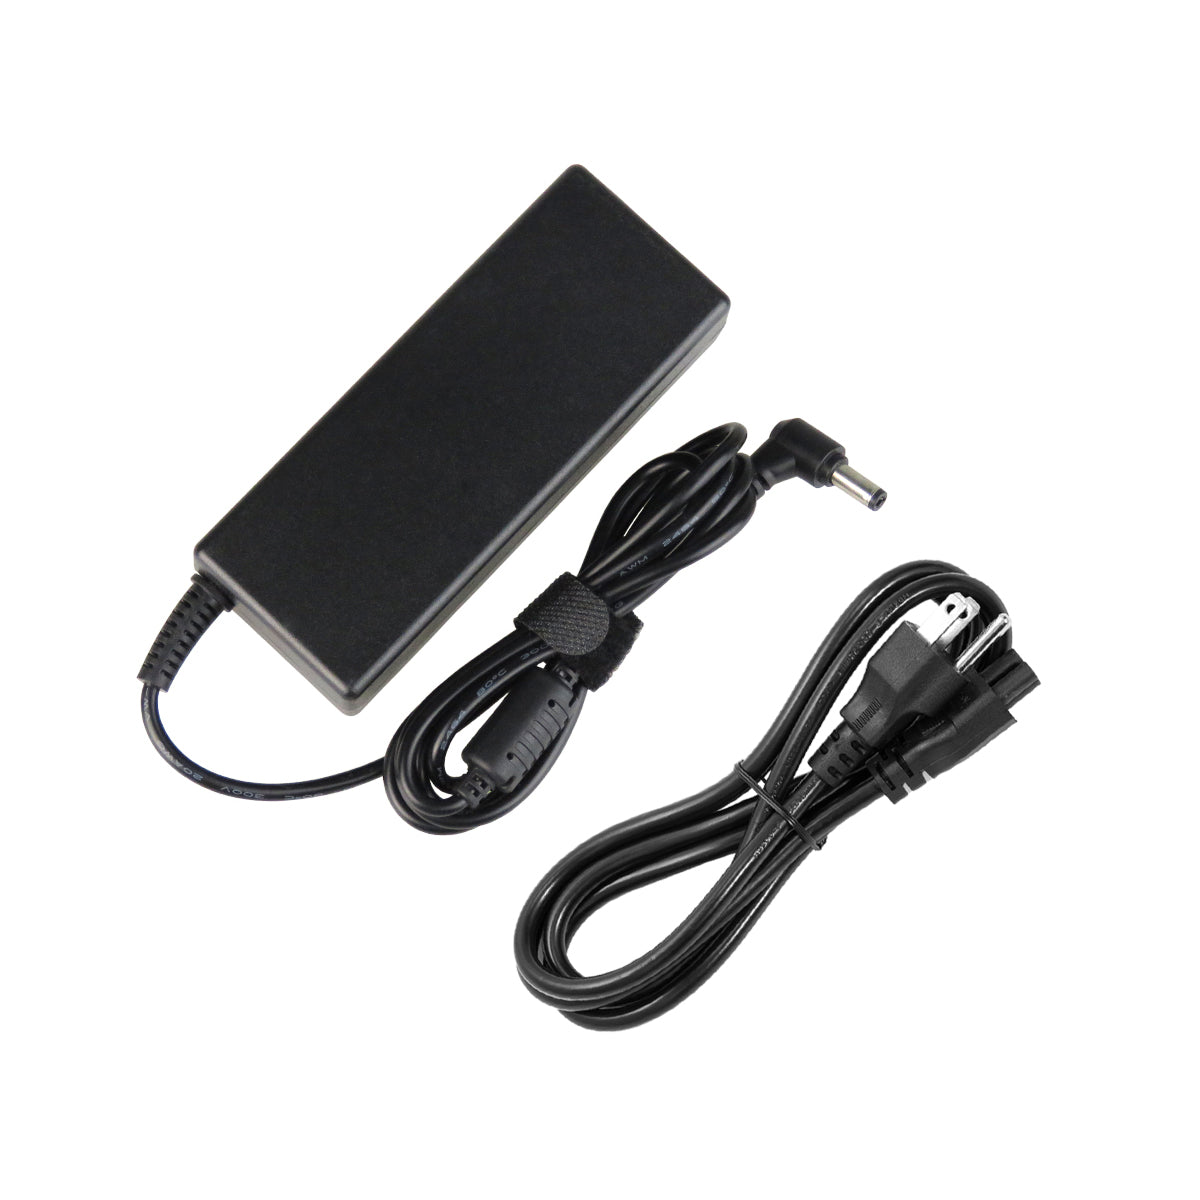 AC Adapter Charger for Gateway M-152 Notebook.